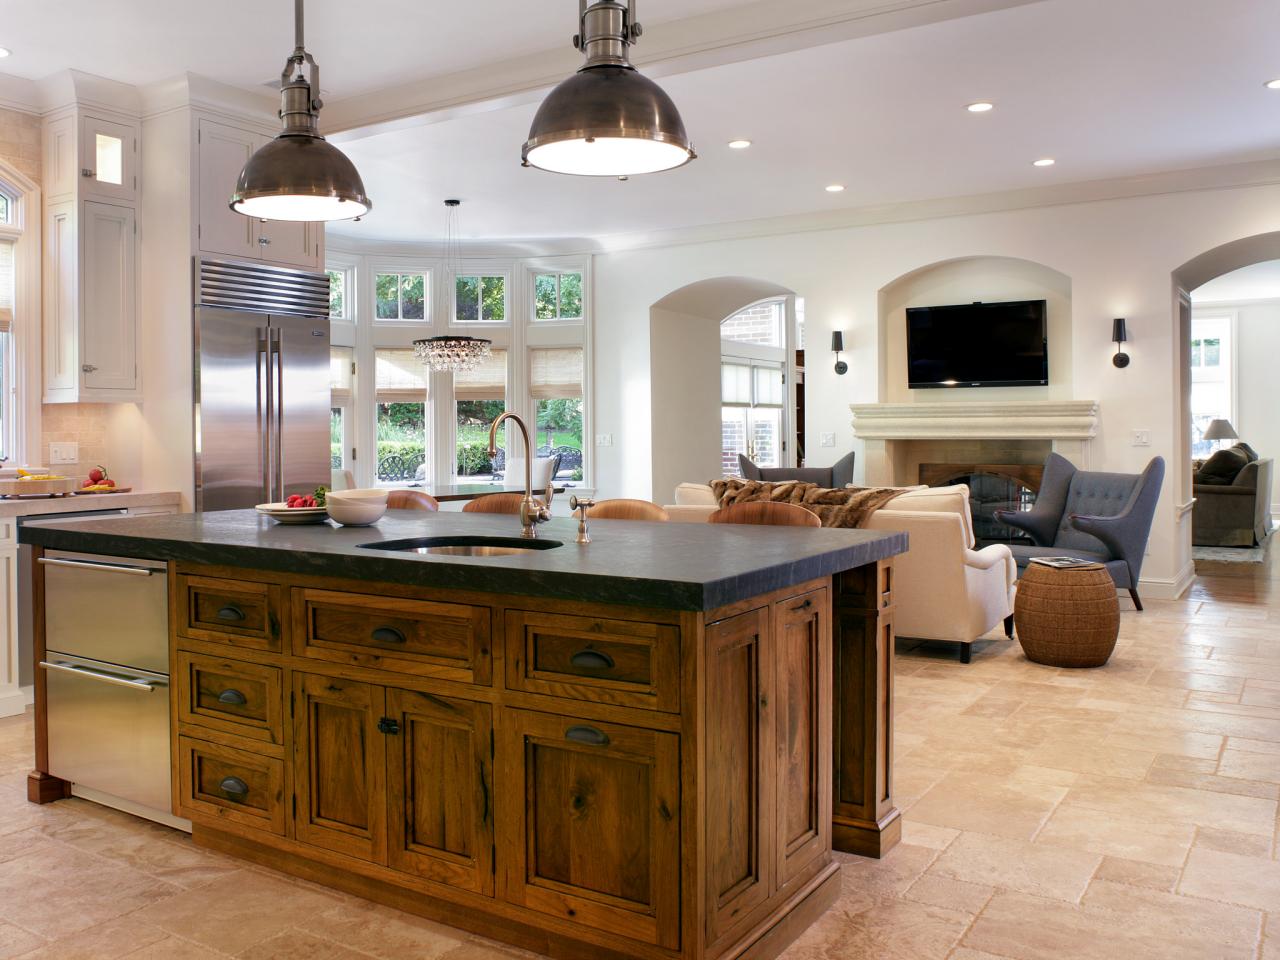 Rustic Kitchen Island With Dark Countertop And Refrigerator